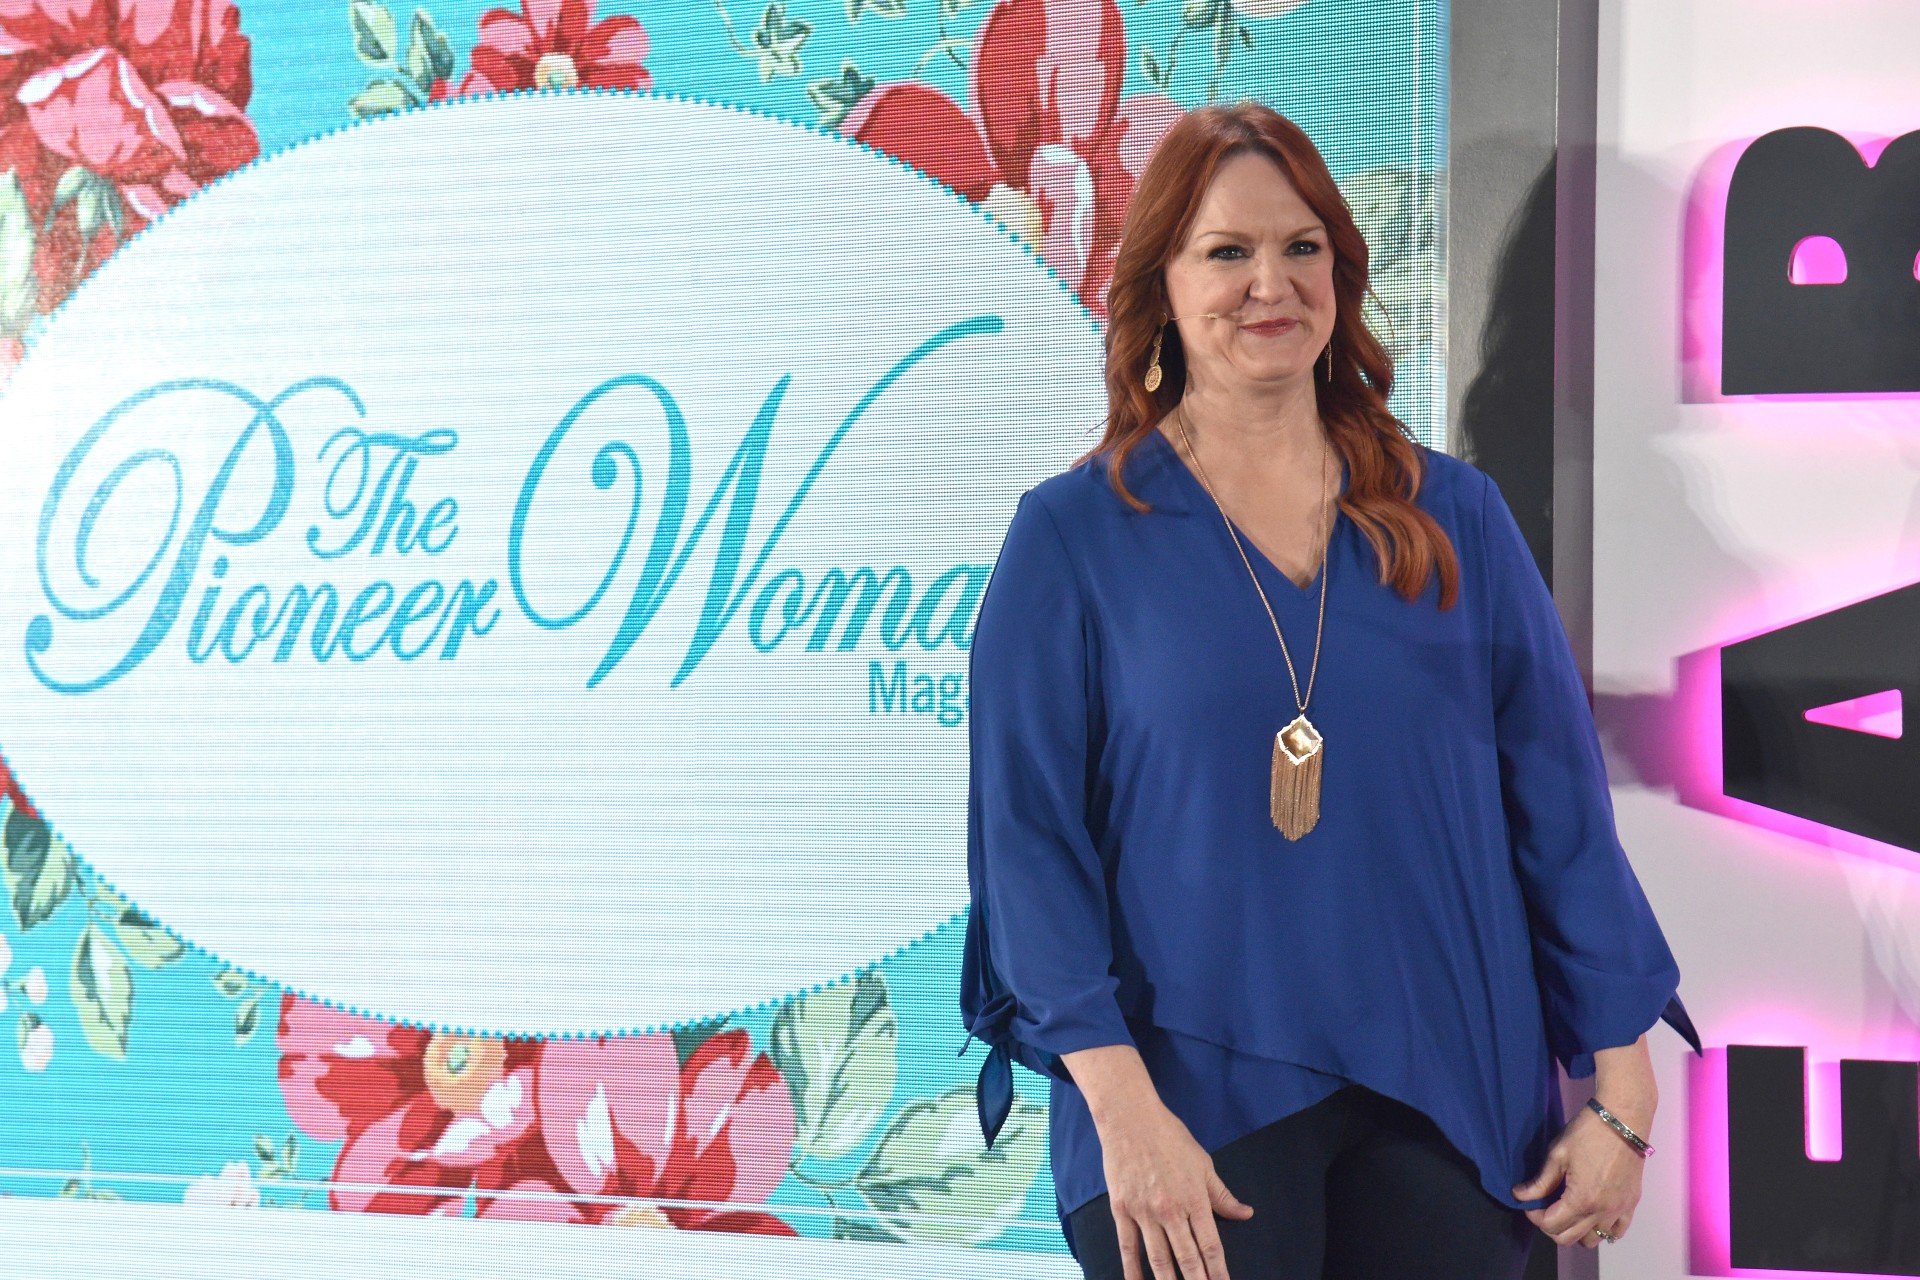 Ree Drummond speaks at a Pioneer Woman magazine event